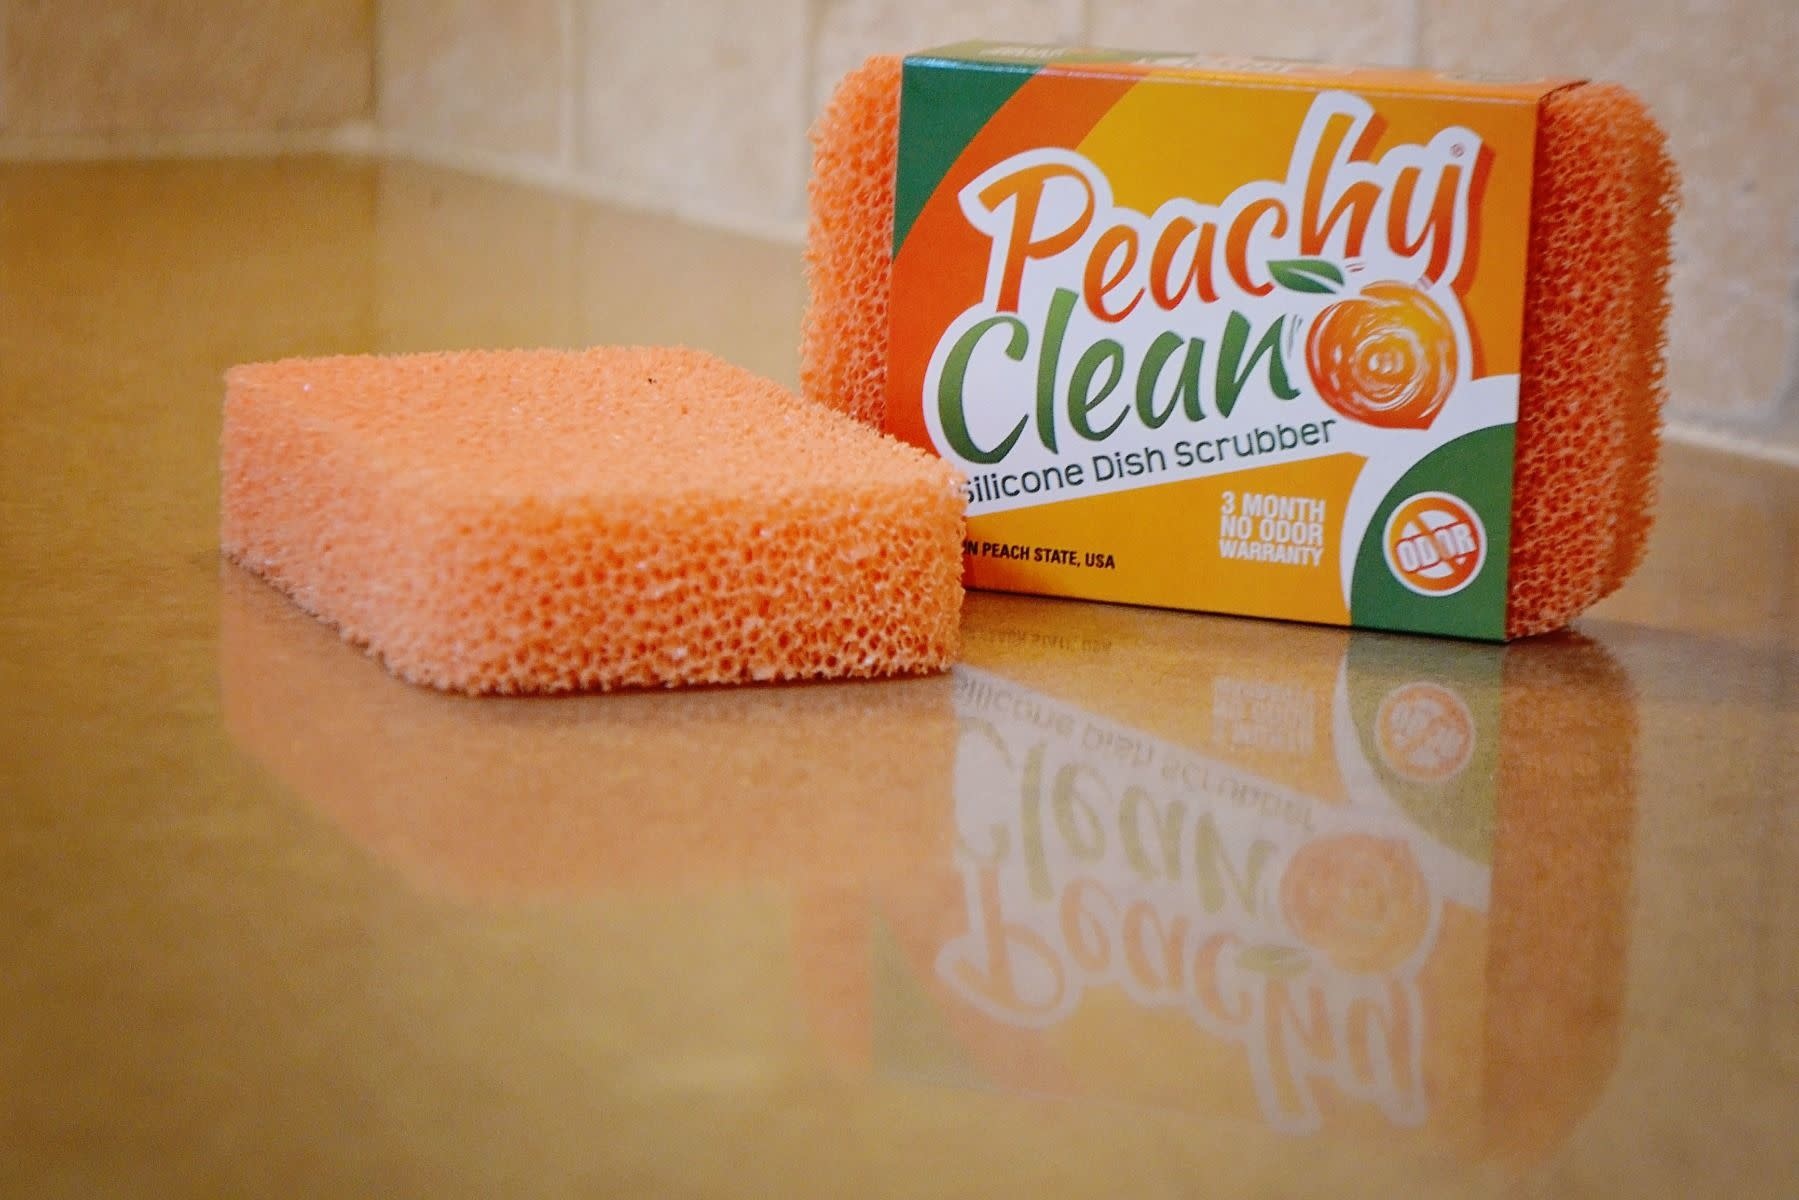 Grand Fusion Peachy Clean Sponges, Kitchen Cleaning Supplies with Fresh Peachy Scent, Dish Scrubber 2 Pack